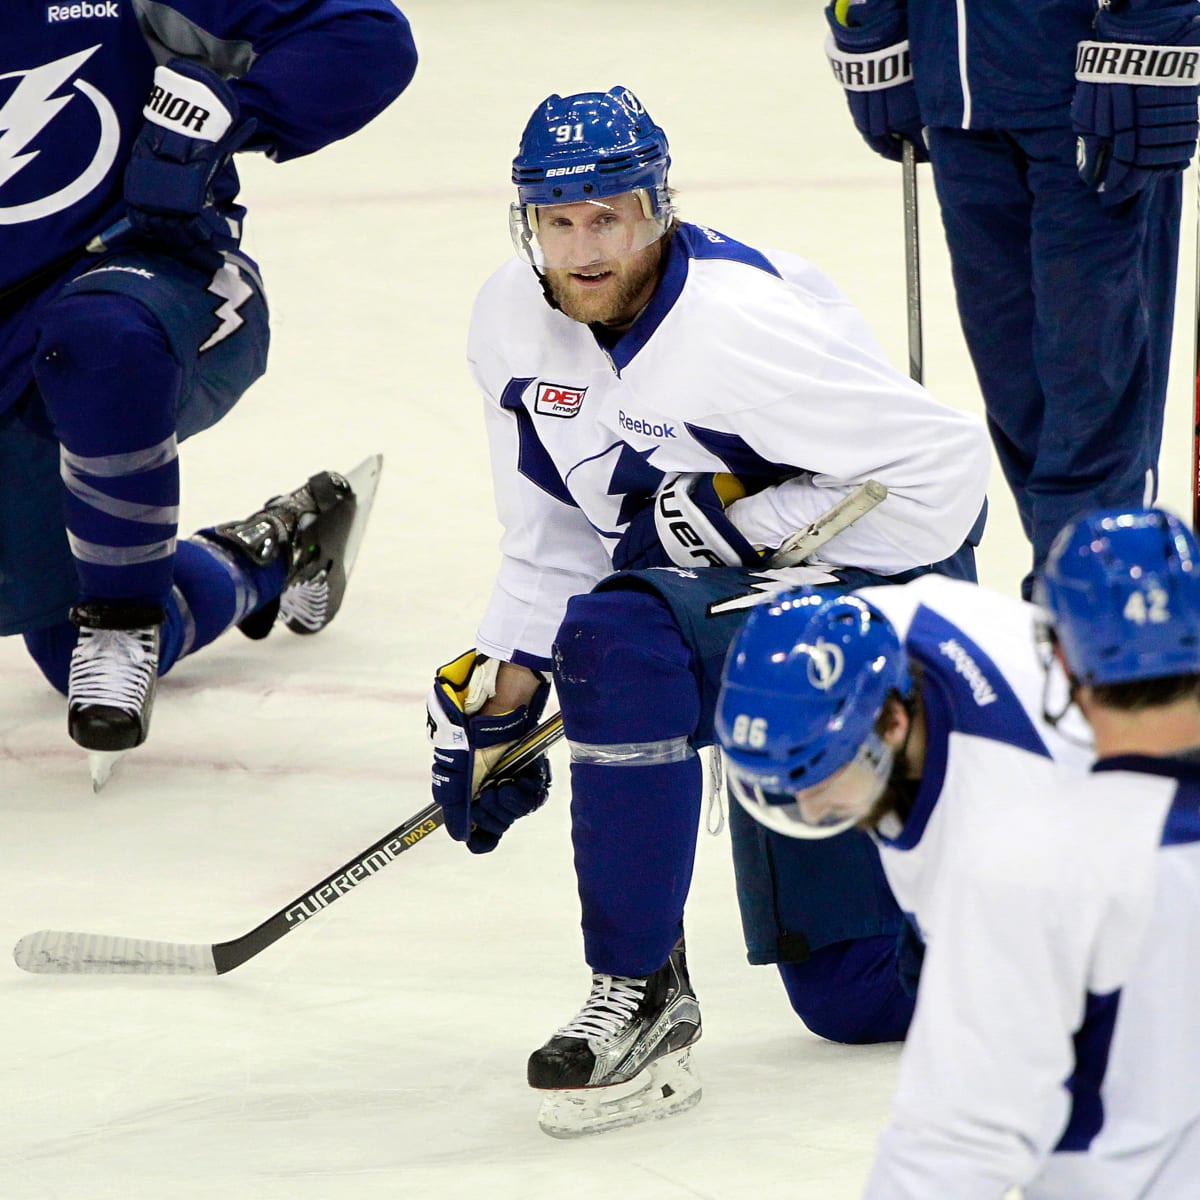 Opening day of Lightning training camp is the start in name only